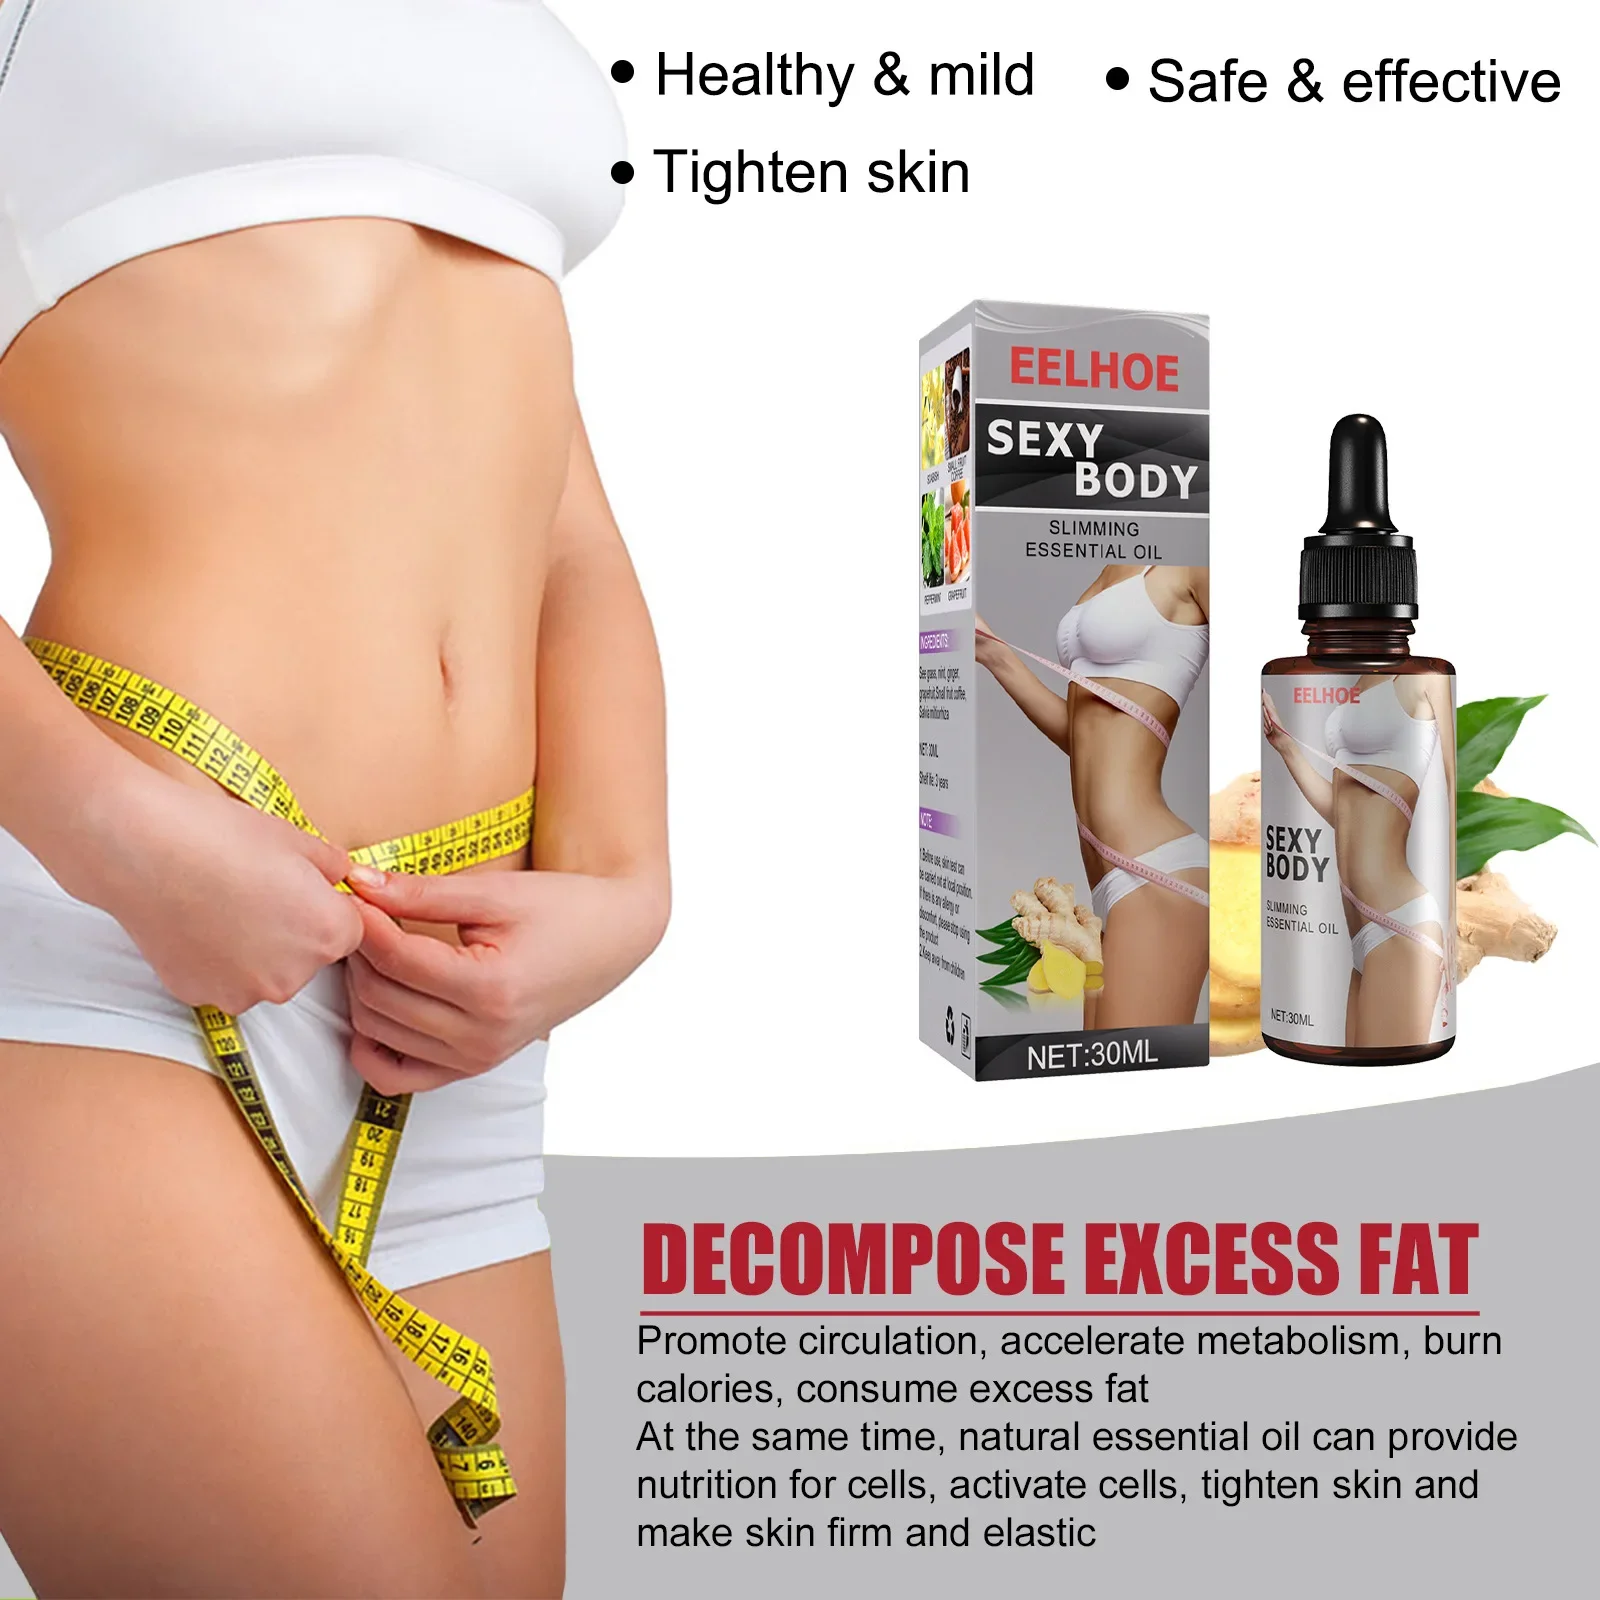 Body Shaping Essential Oil Tightens the Belly Strains the Abdomen Shapes Thin Thigh Muscles and Slims the Body